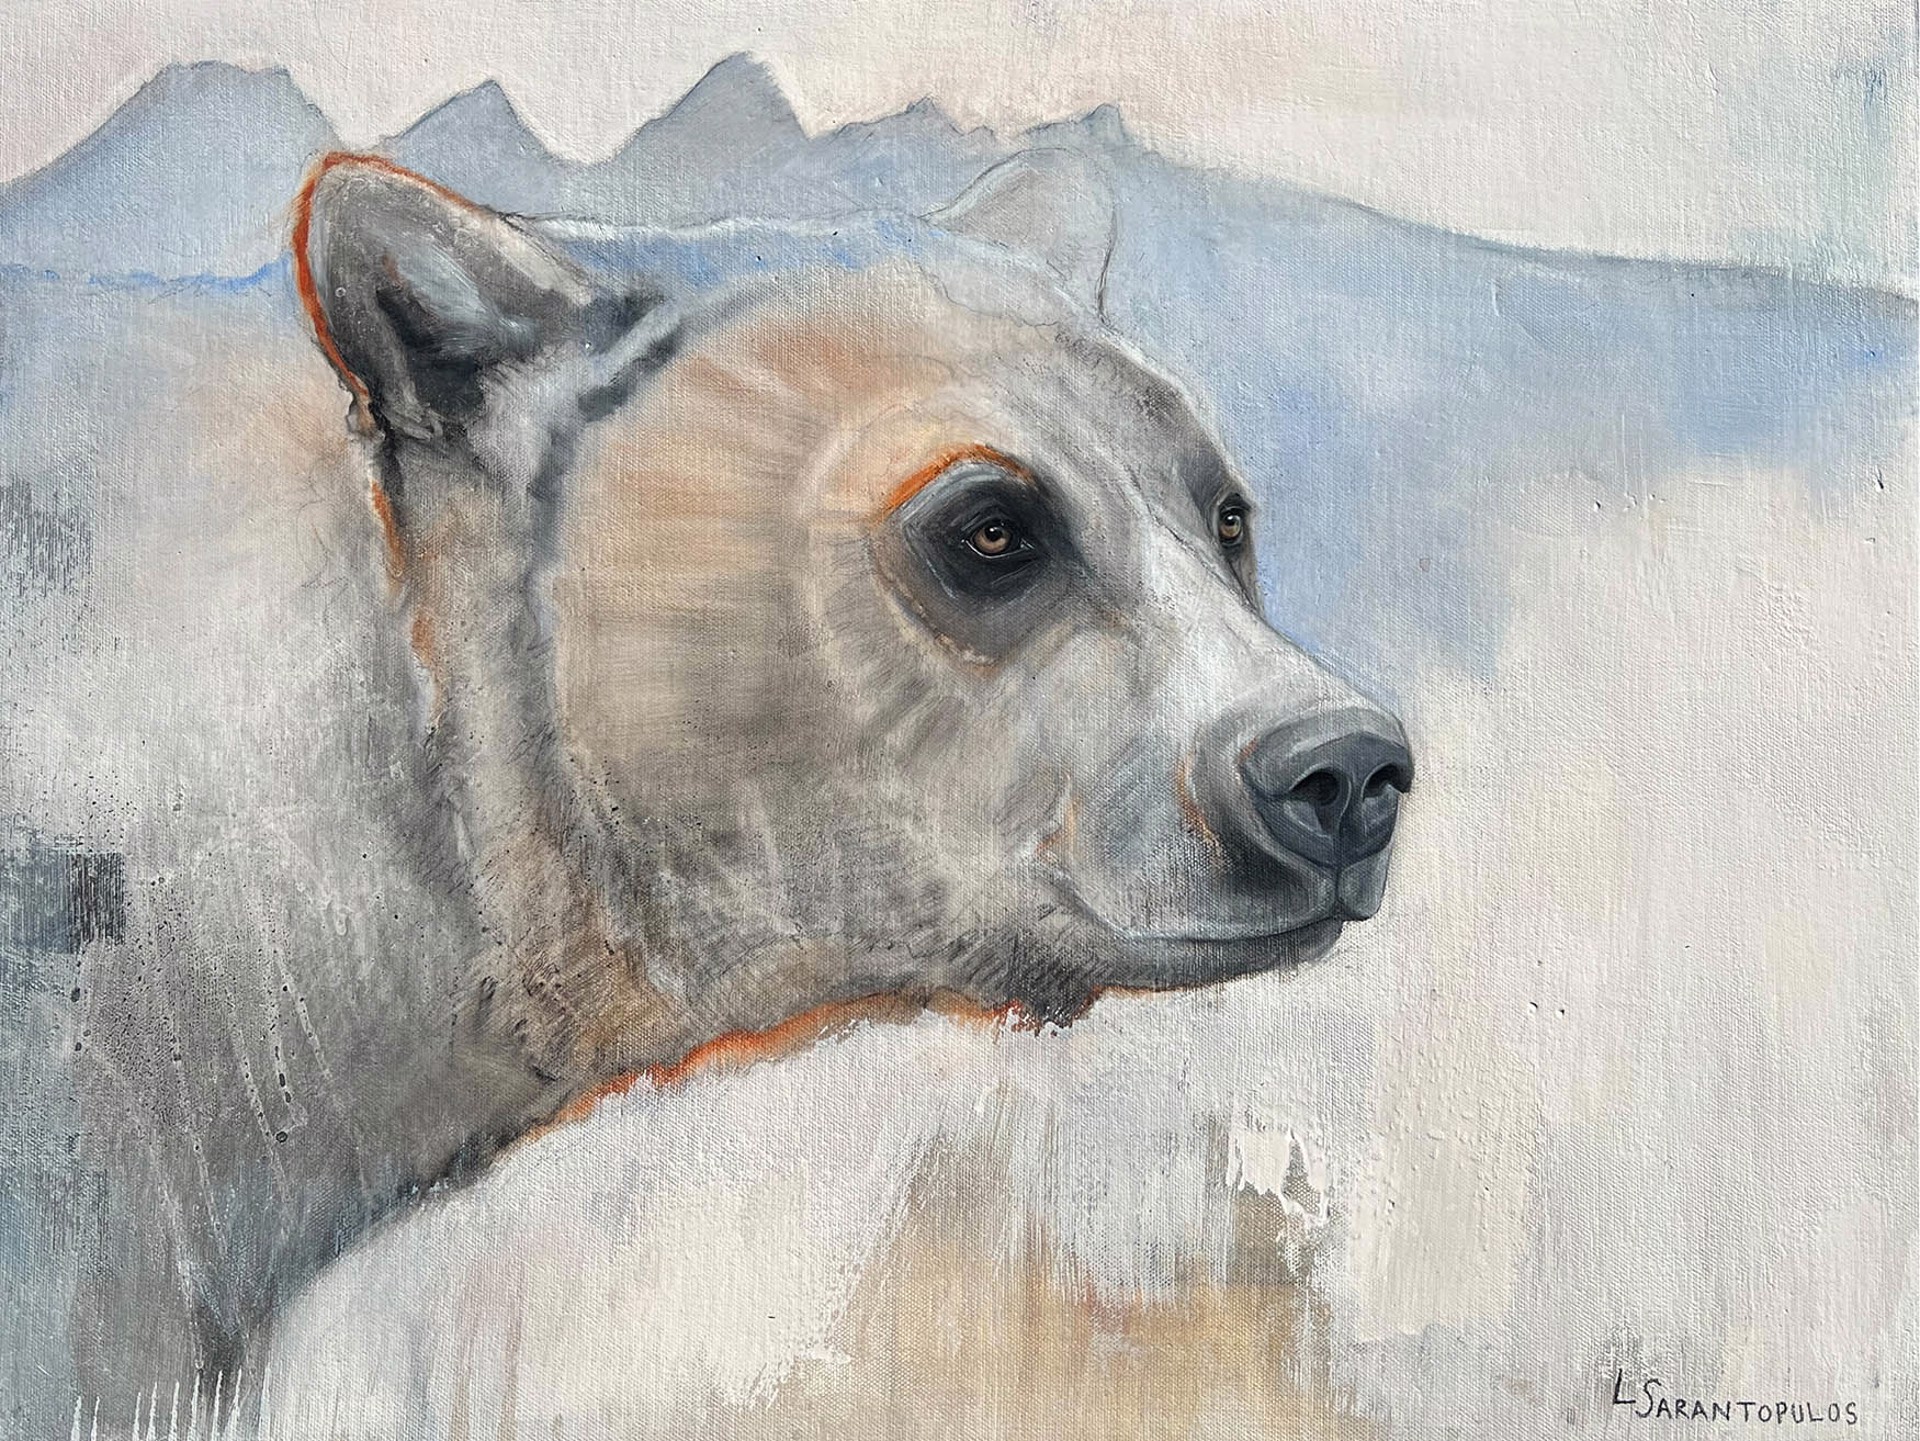 Original Mixed Media Painting Featuring A Bear Portrait In Profile With Blue Teton Mountain Range In Background